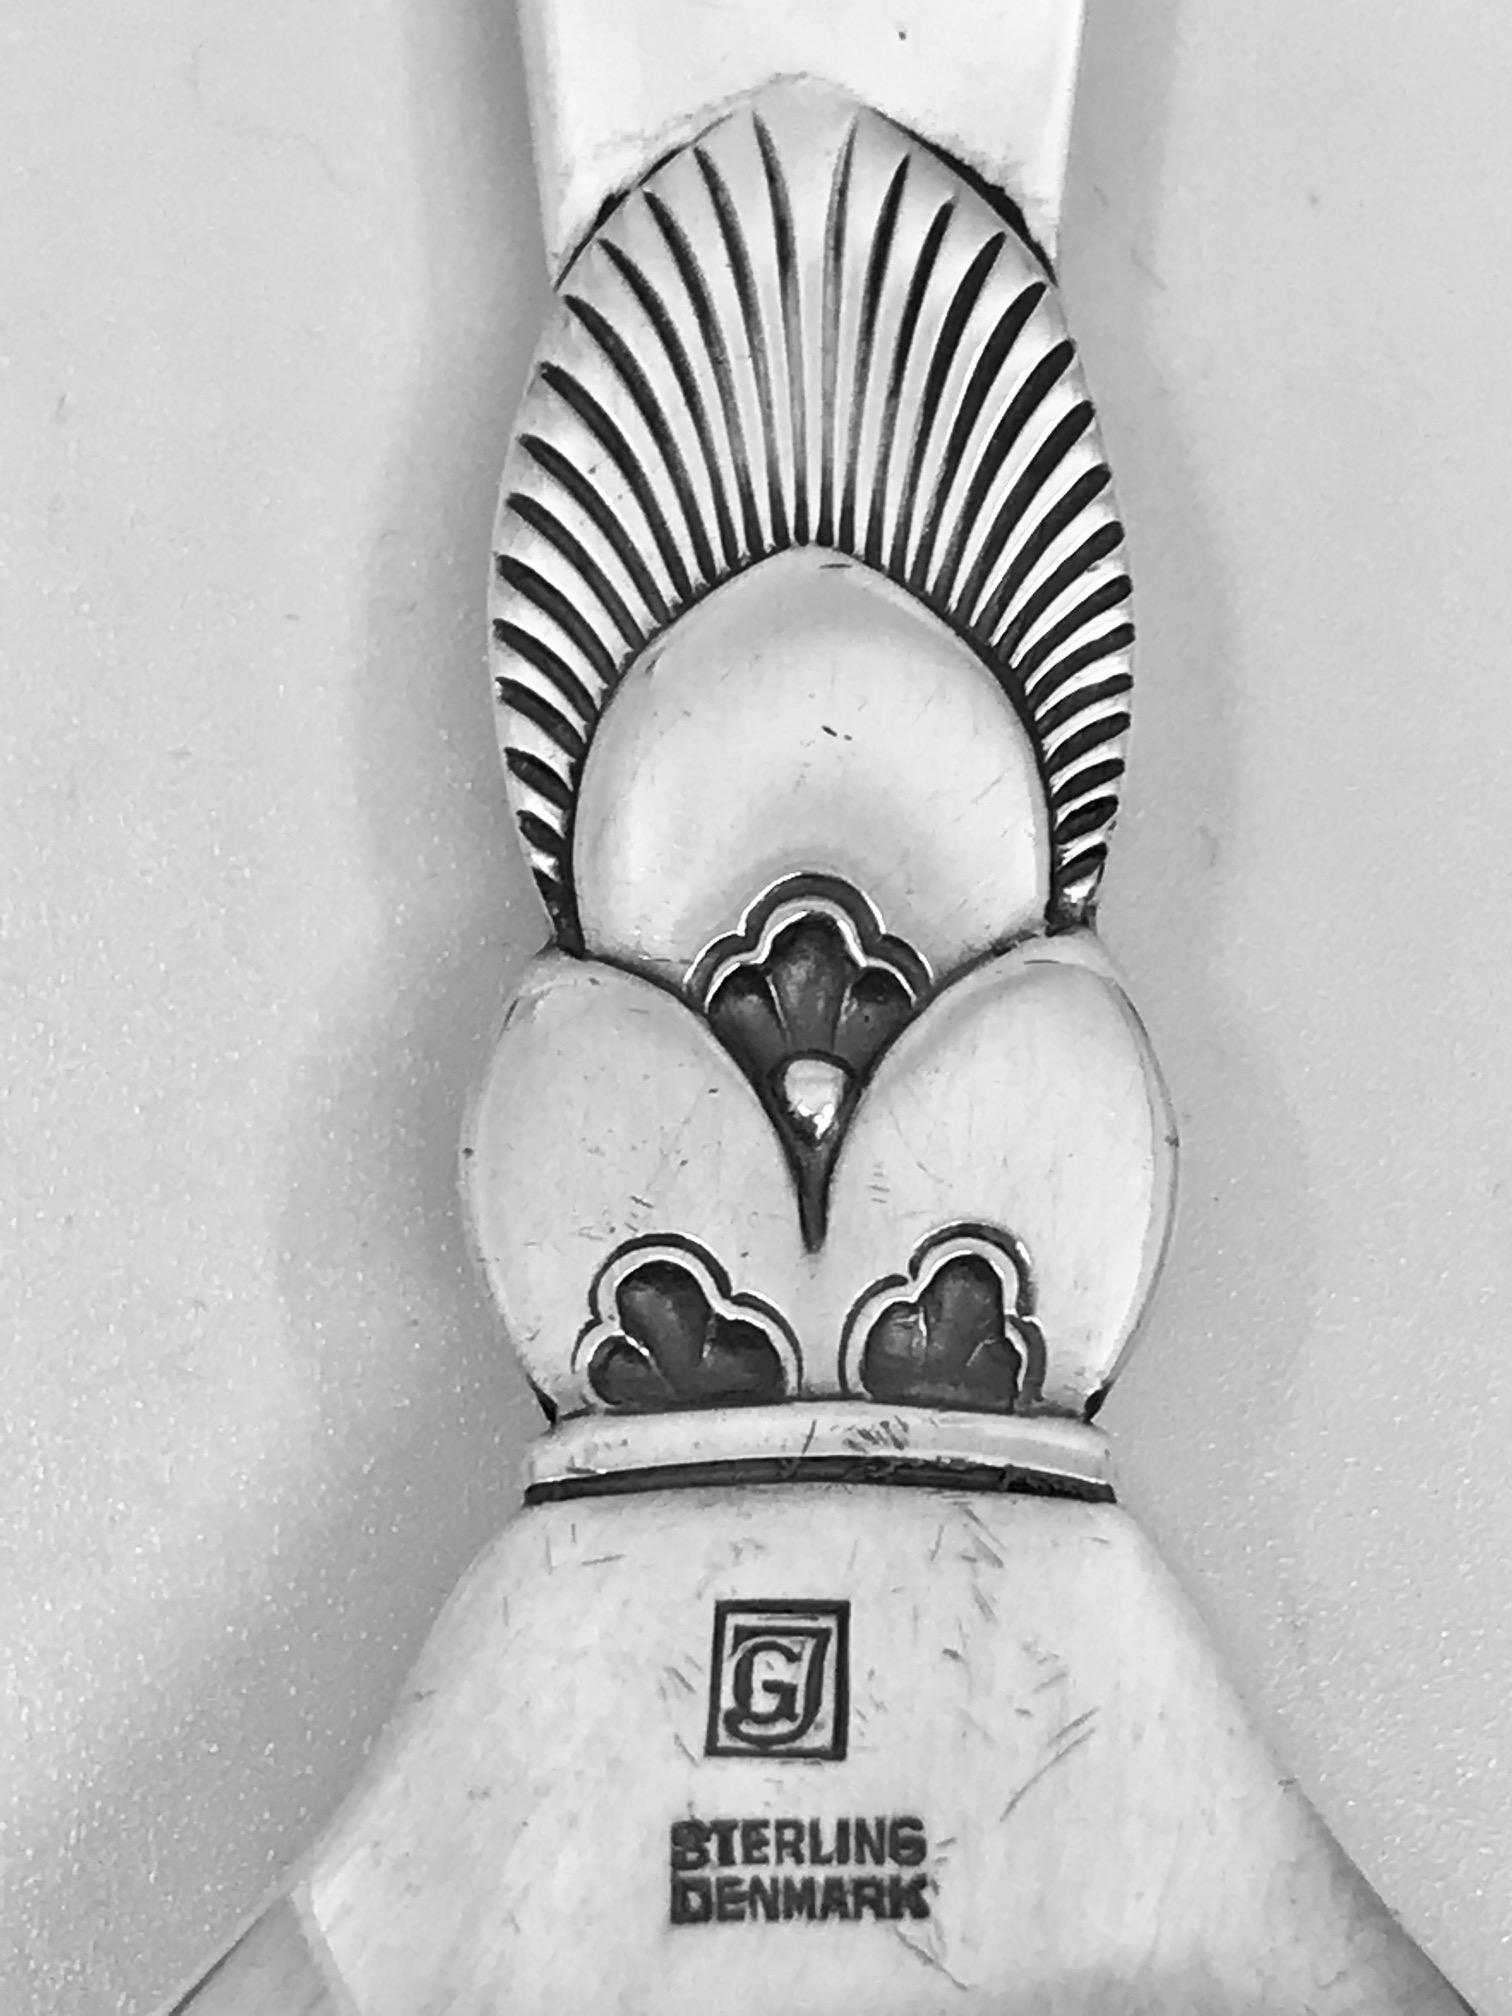 Sterling silver Georg Jensen small serving spoon, item 115 in the Cactus pattern, design #30 by Gundorph Albertus from 1930.

Additional information:
Material: Sterling Silver
Hallmarks: With Georg Jensen hallmark, made in Denmark.
Dimensions: